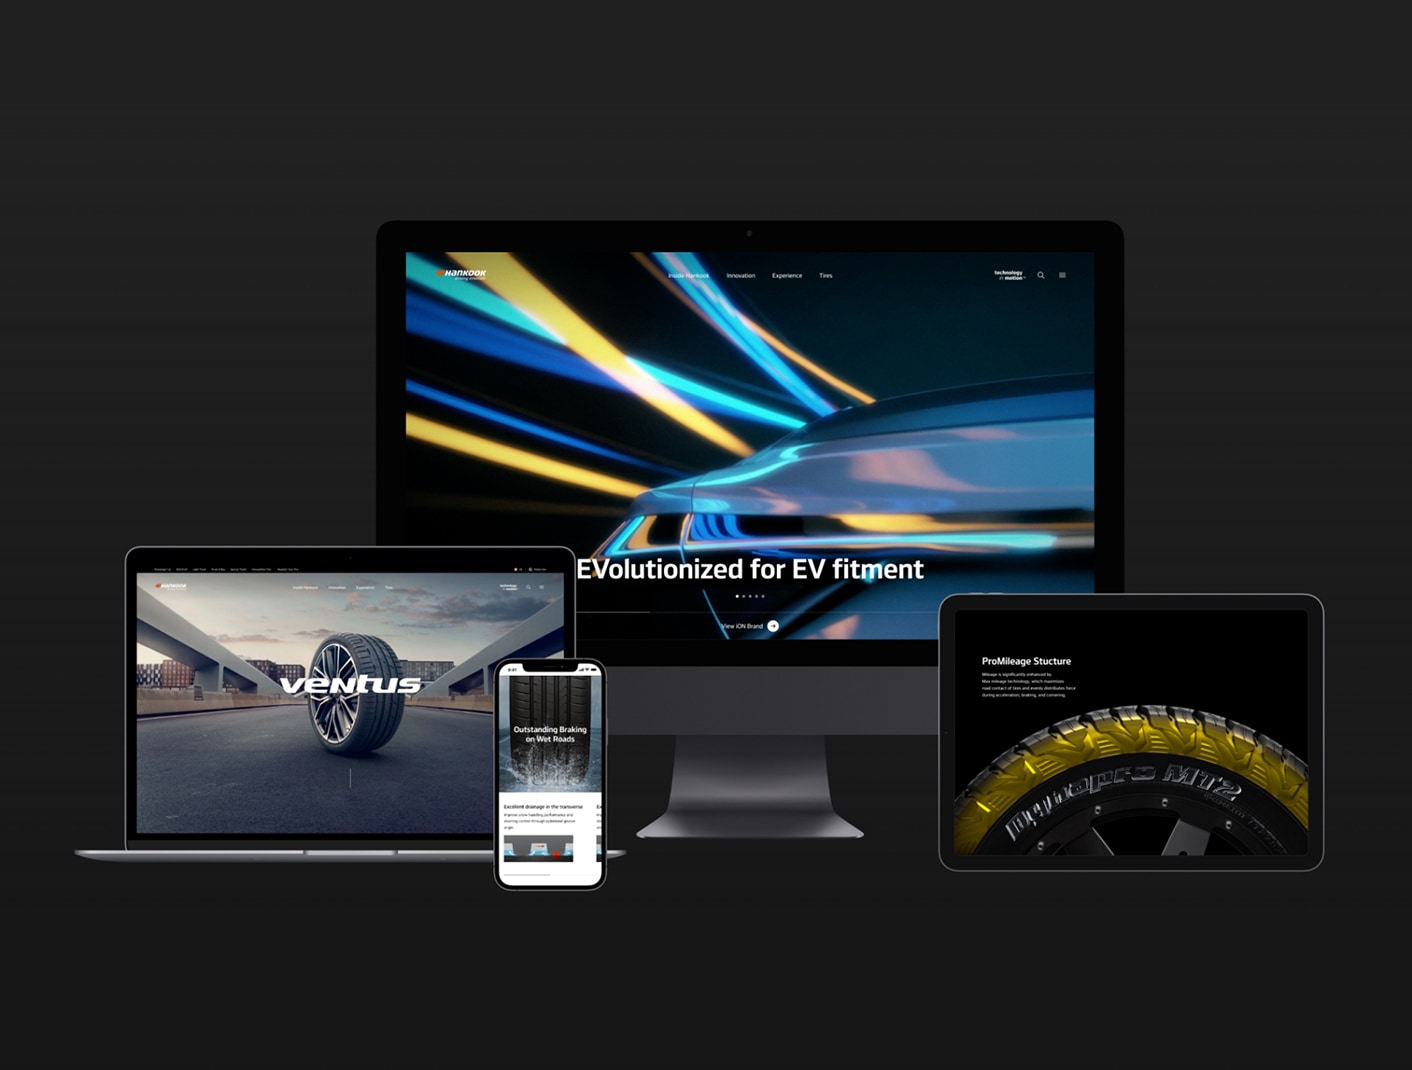 Hankook Tire announces website renewal in 26 countries